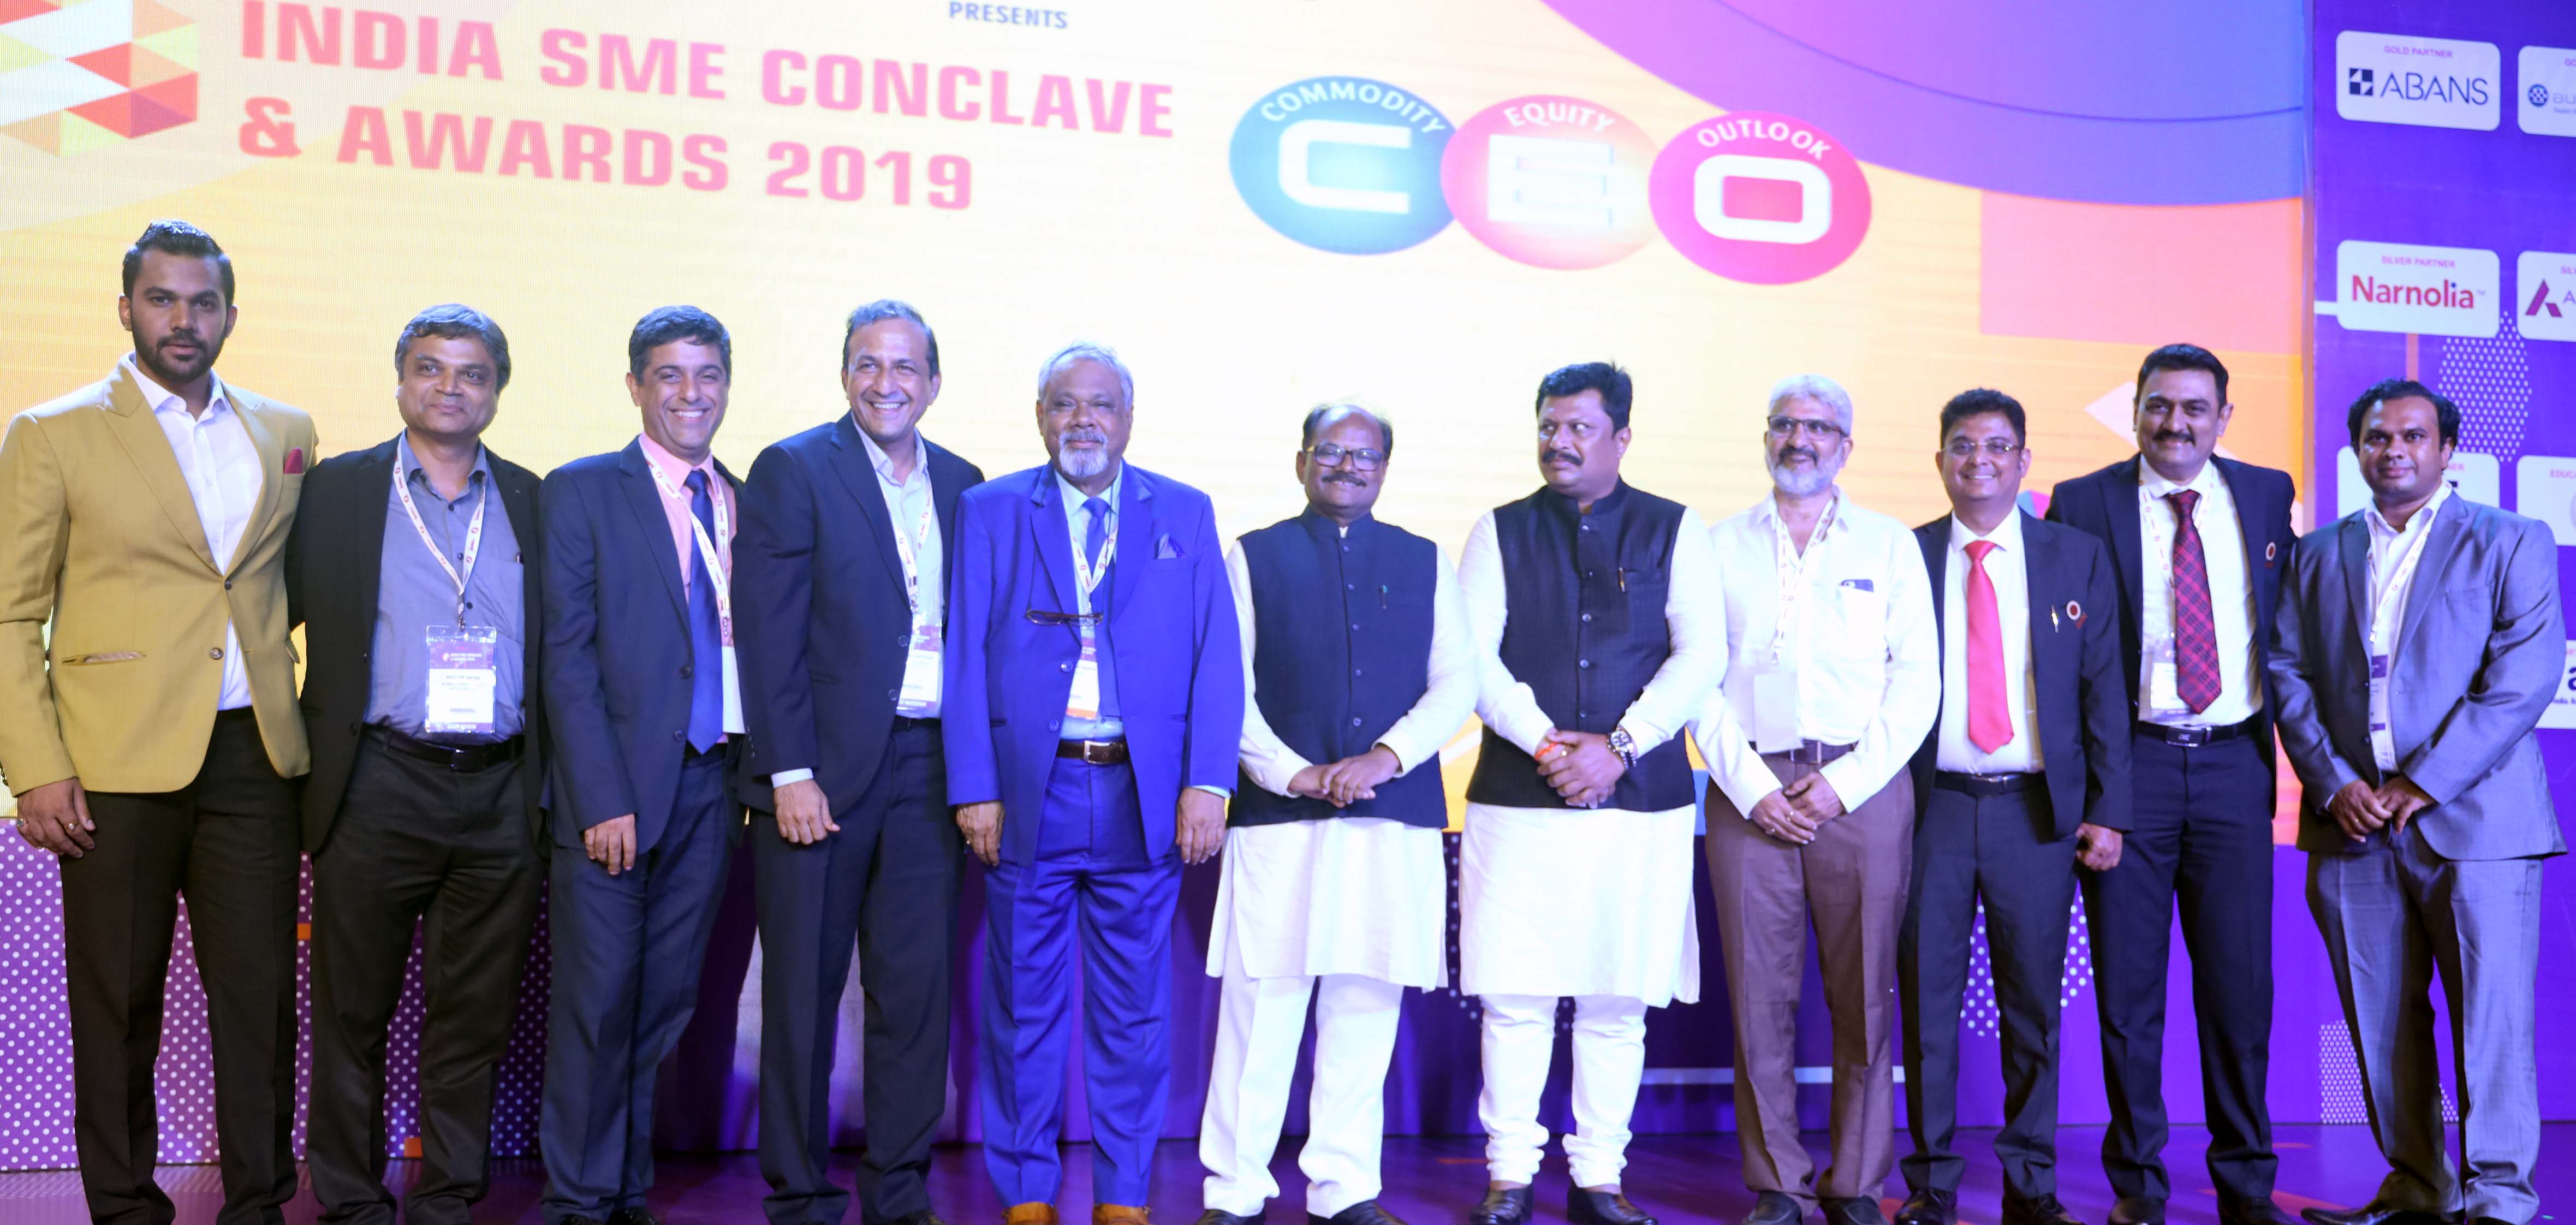 India SME Conclave and Awards organised by Tefla’s.